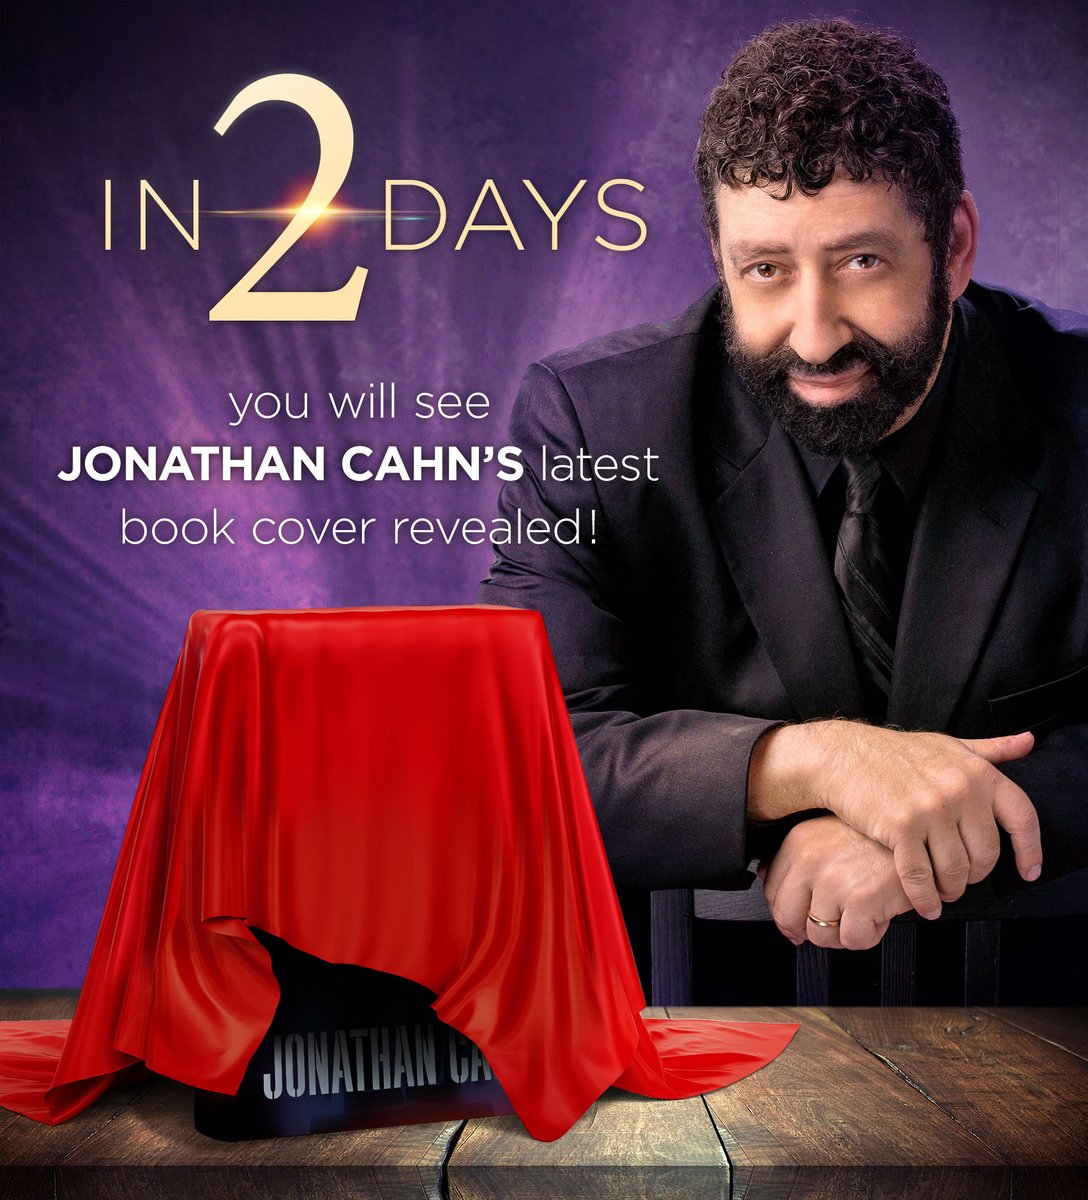 TWO DAYS! We can hardly wait for the reveal of #NYTBestSellingAuthor @JonathanCahn's newest book cover. Don't miss it! BooksbyJonathanCahn.com

#jonathancahn #charismahousebooks #bookrelease #bookreveal #newbook #twitterbooks #christianread #summerreading